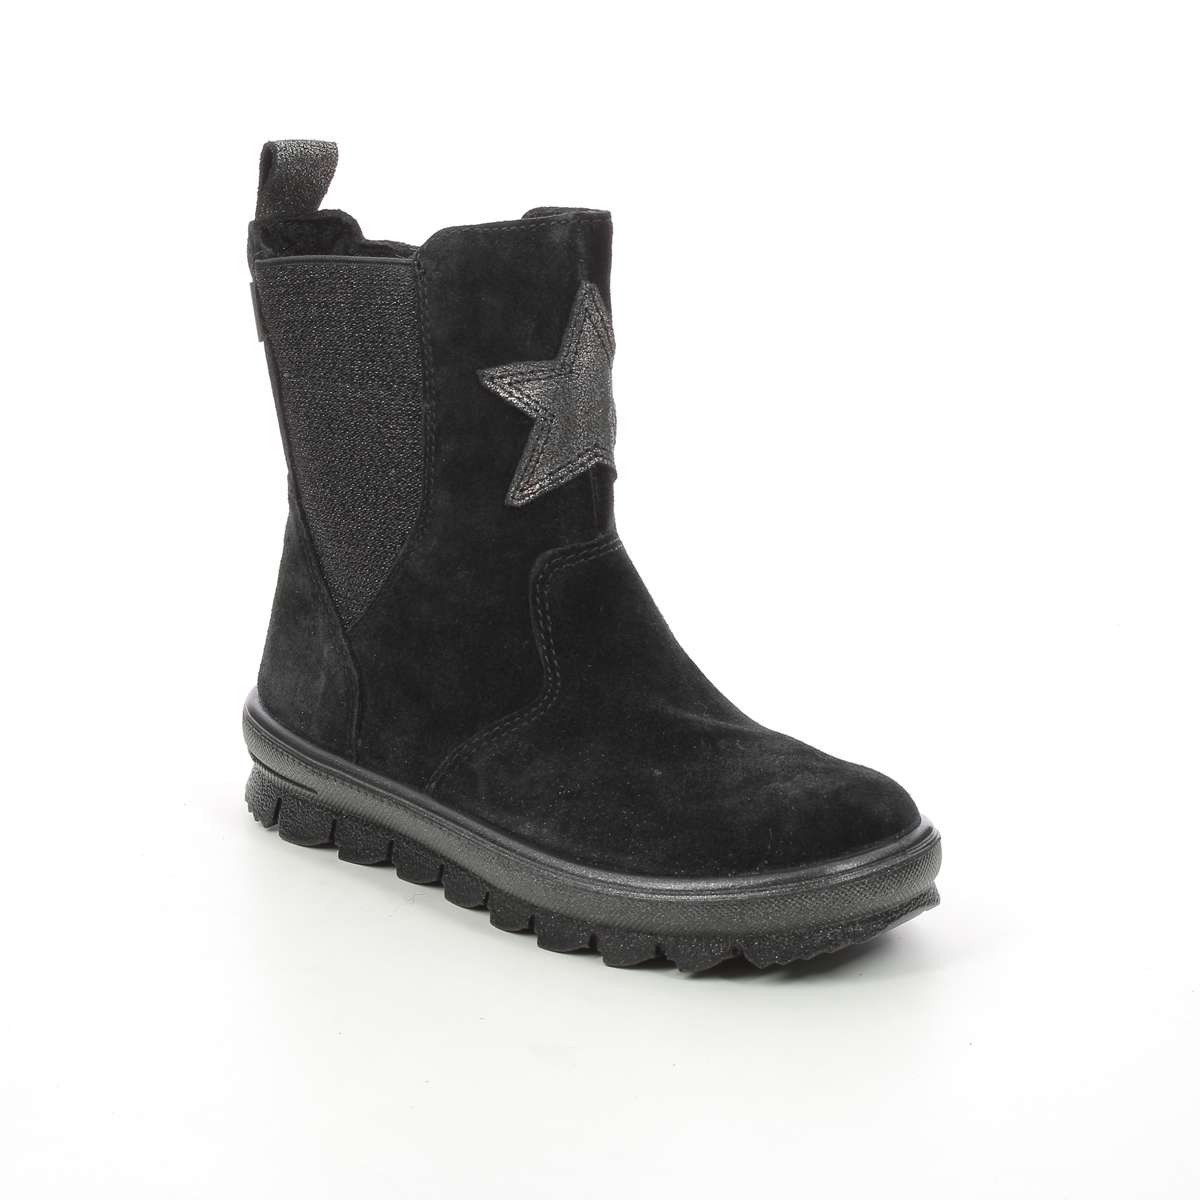 Superfit Flavia Star Gtx Black Suede Kids Girls Boots 1000217-0000 In Size 27 In Plain Black Suede For kids